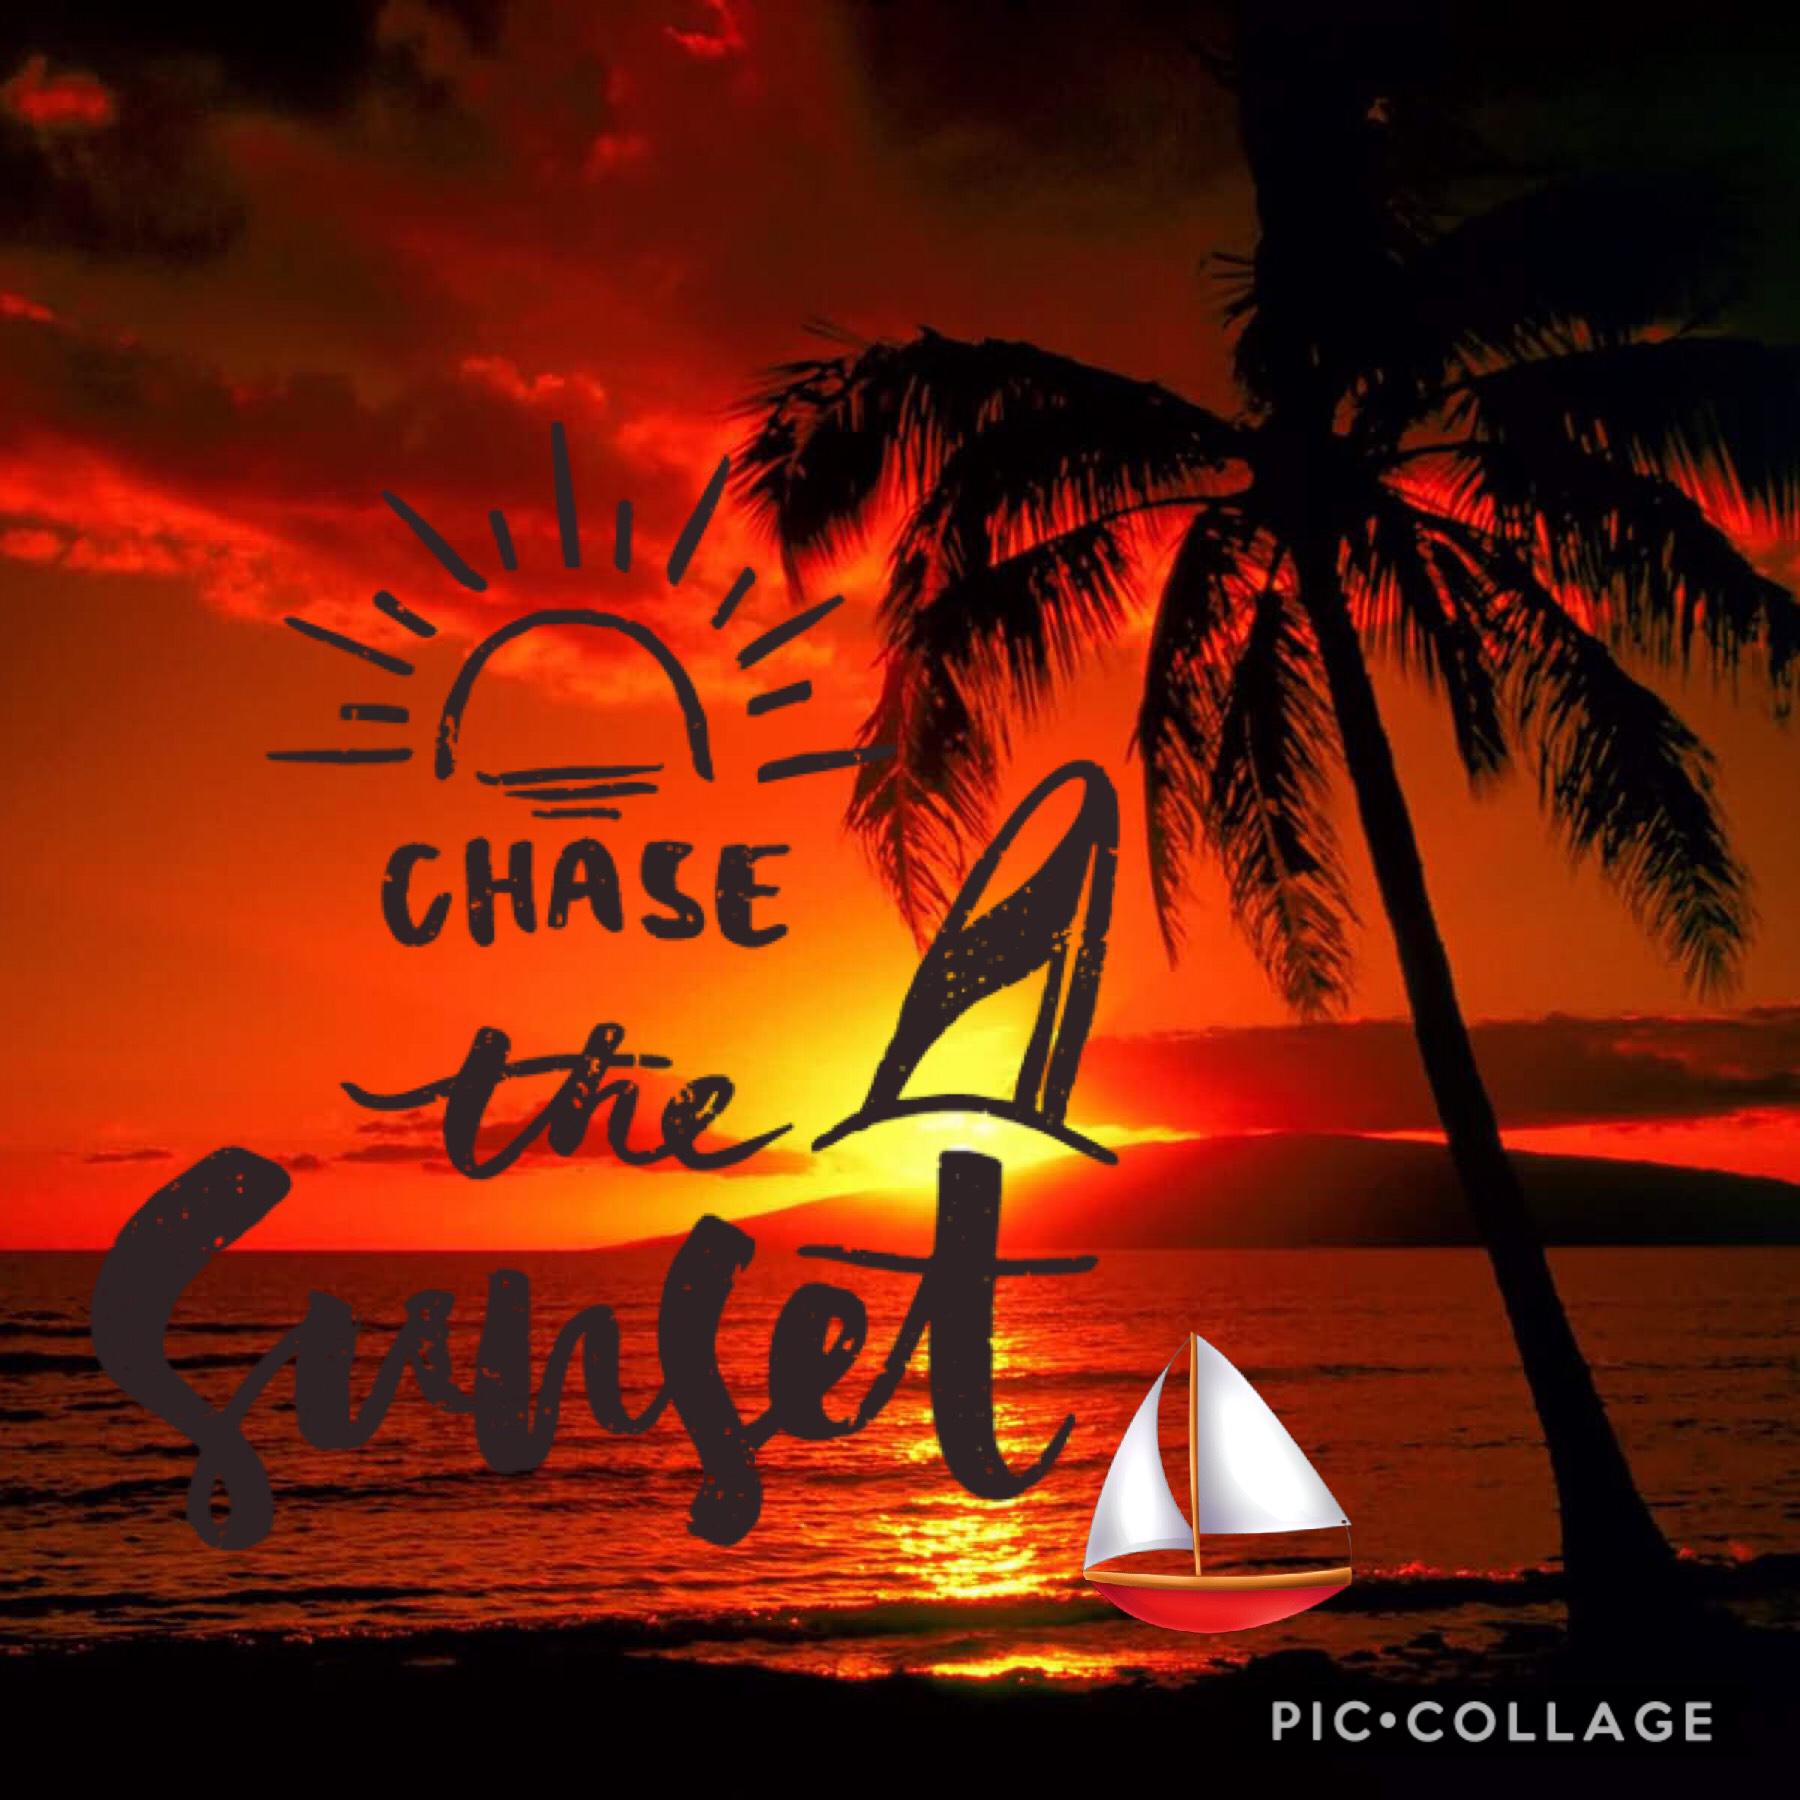 Hey Guys! 
Chase the sunset